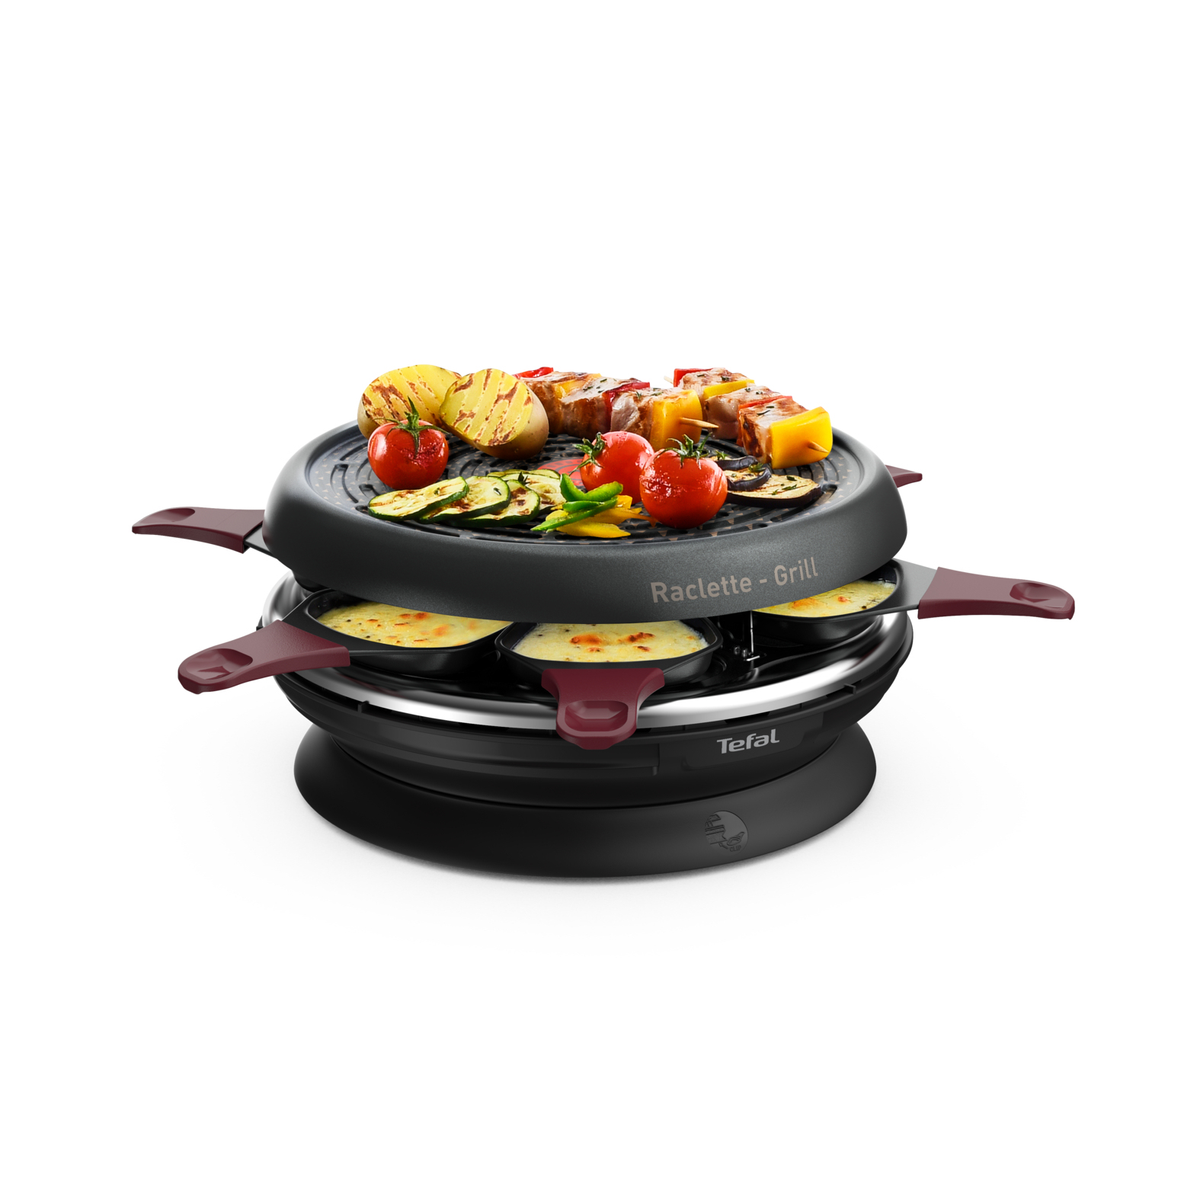 1820 TEFAL Raclette RACLETTE-GRILL NEO RE INVENT